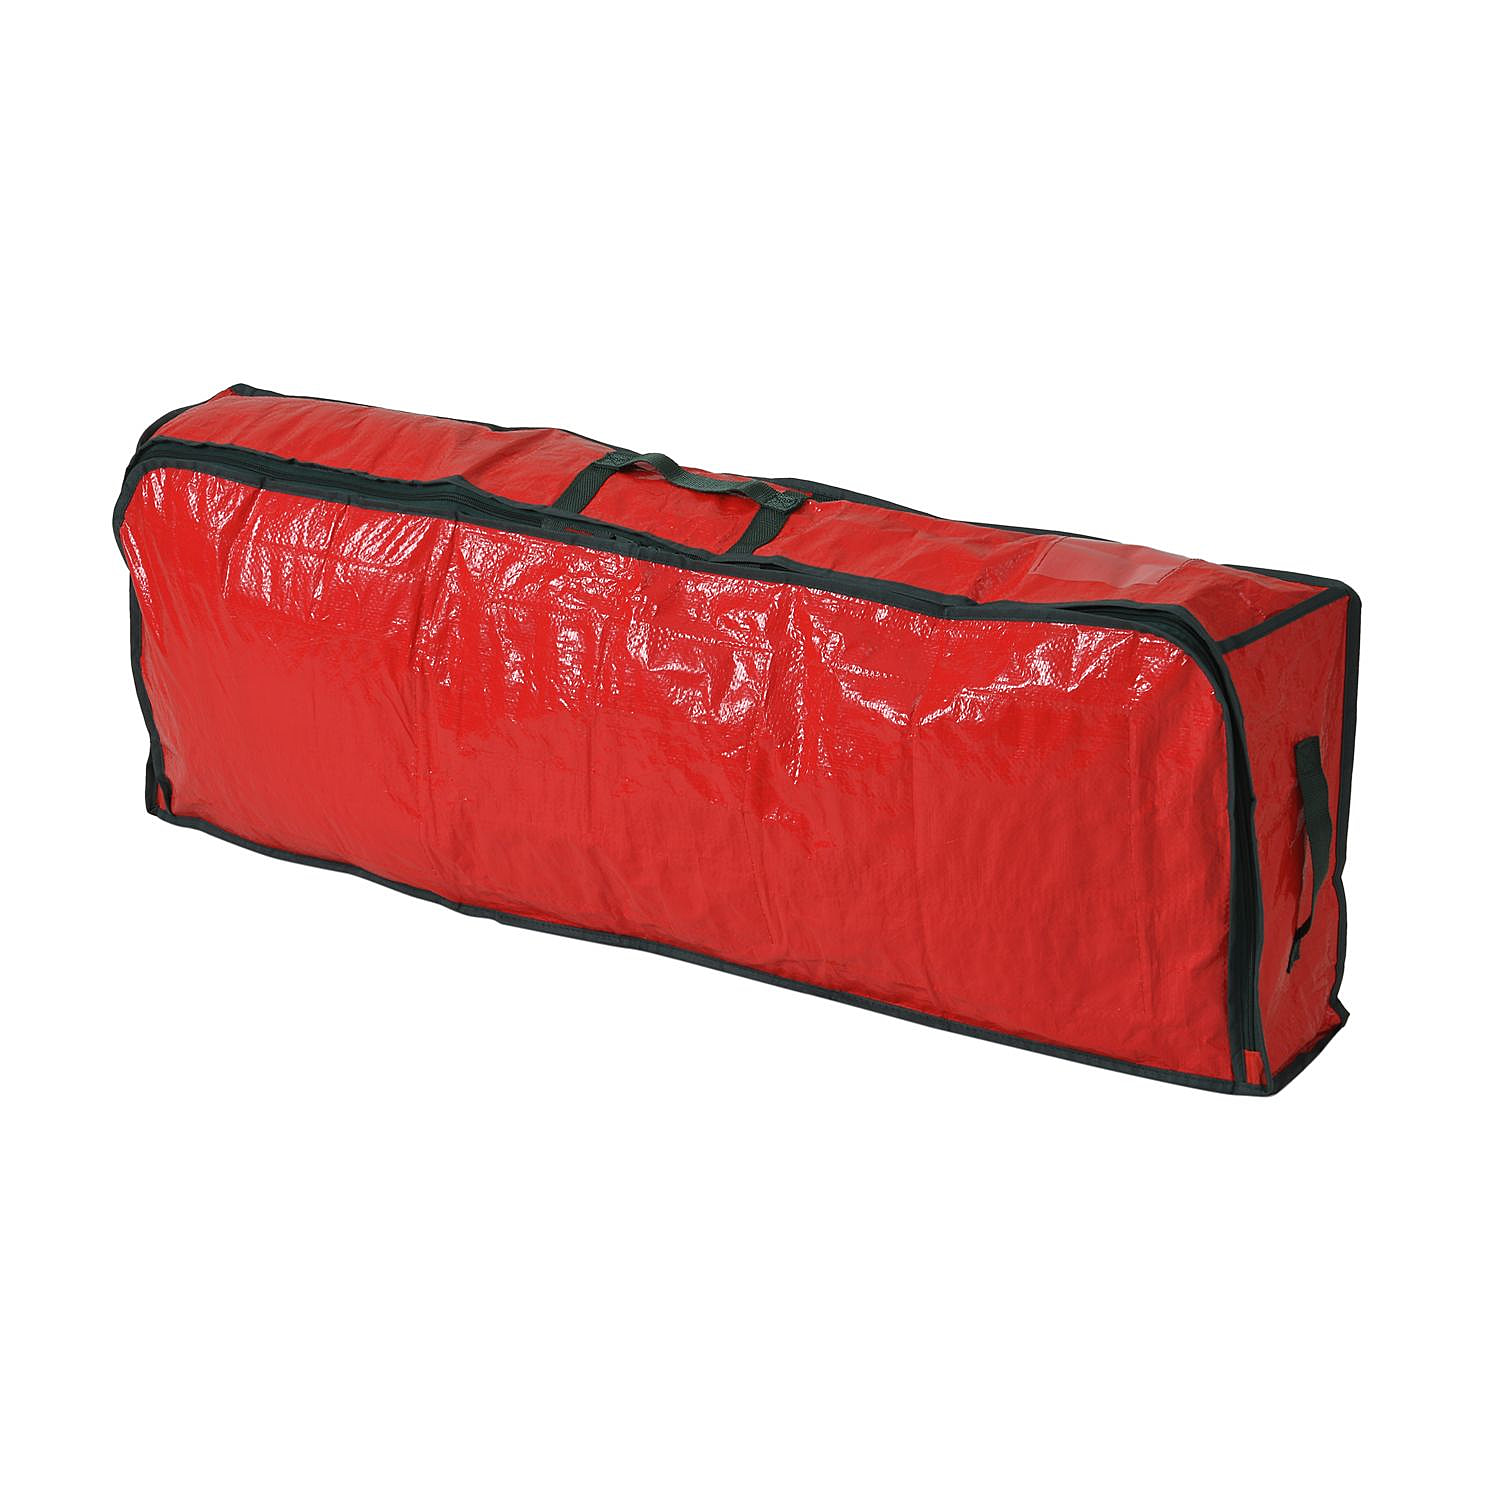 Waterproof-Storage-Bag-with-Multiple-Pockets-Inside-(Size-103x35.5x15.